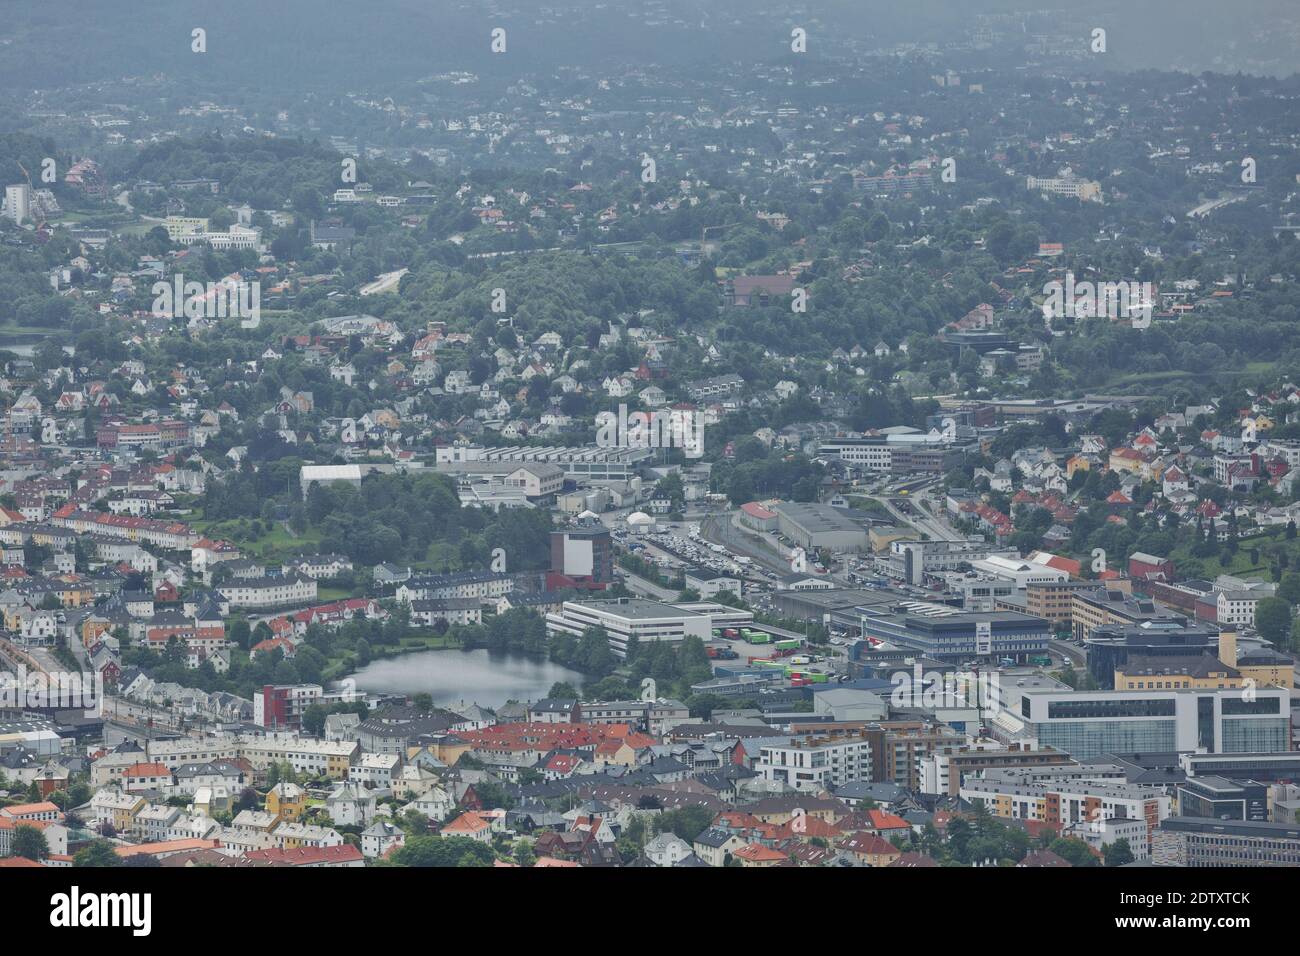 Bergen, Norway - July 18, 2017: View of Bergen city from Mount Floyen, Floyen is one of the city mountains in Bergen, Hordaland, Norway, and one of th Stock Photo